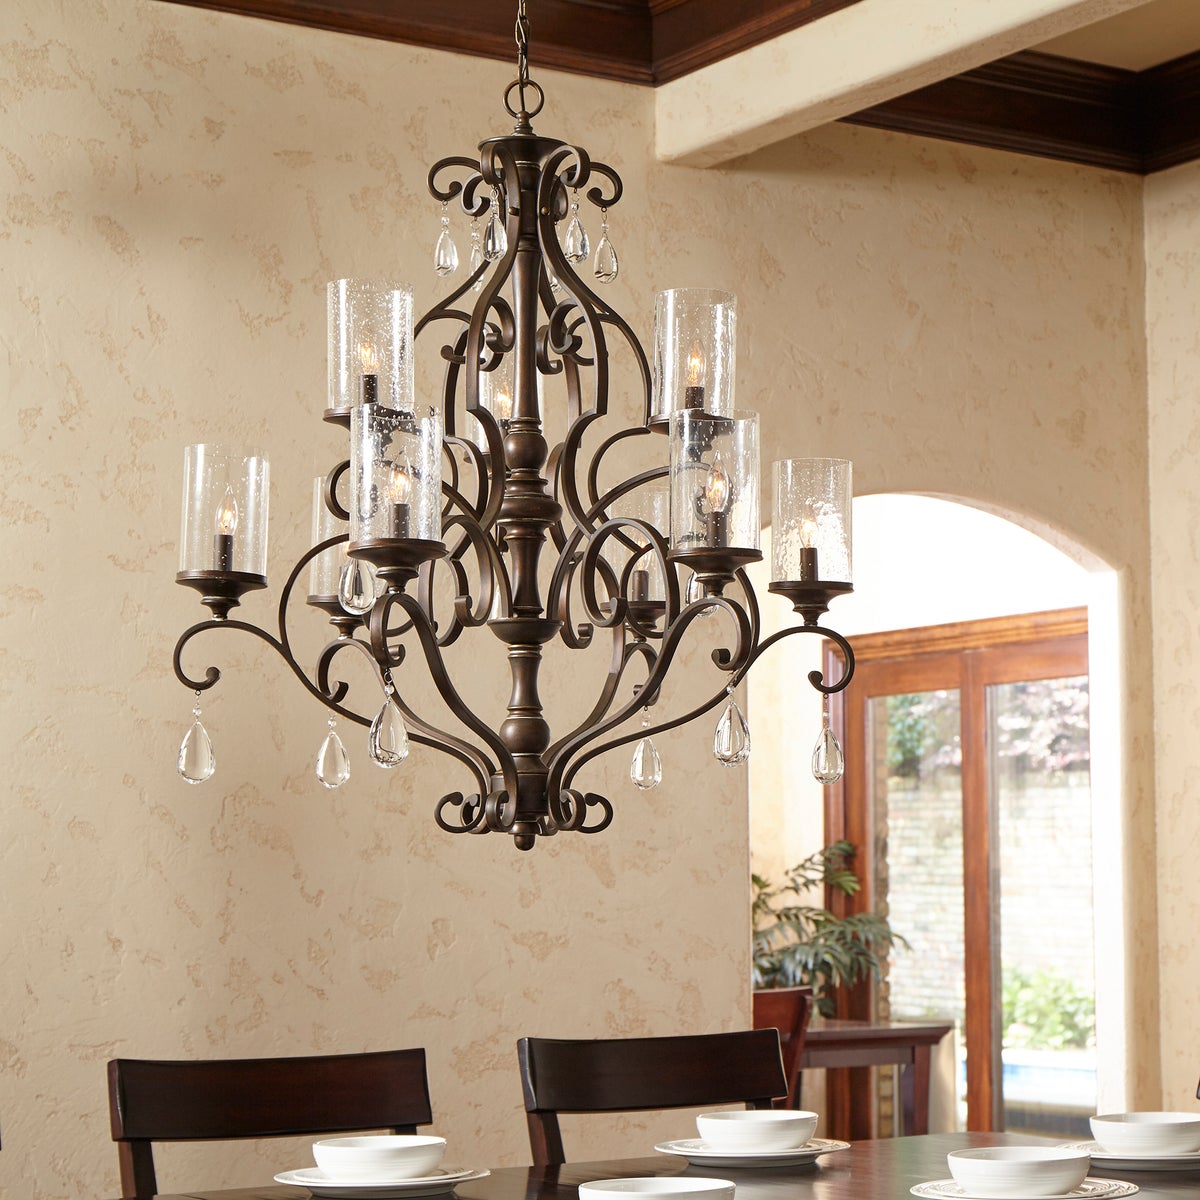 Spanish Chandelier with clear glass shades and curved arms, exuding traditional elegance and updated appeal. Add a touch of class to your space.